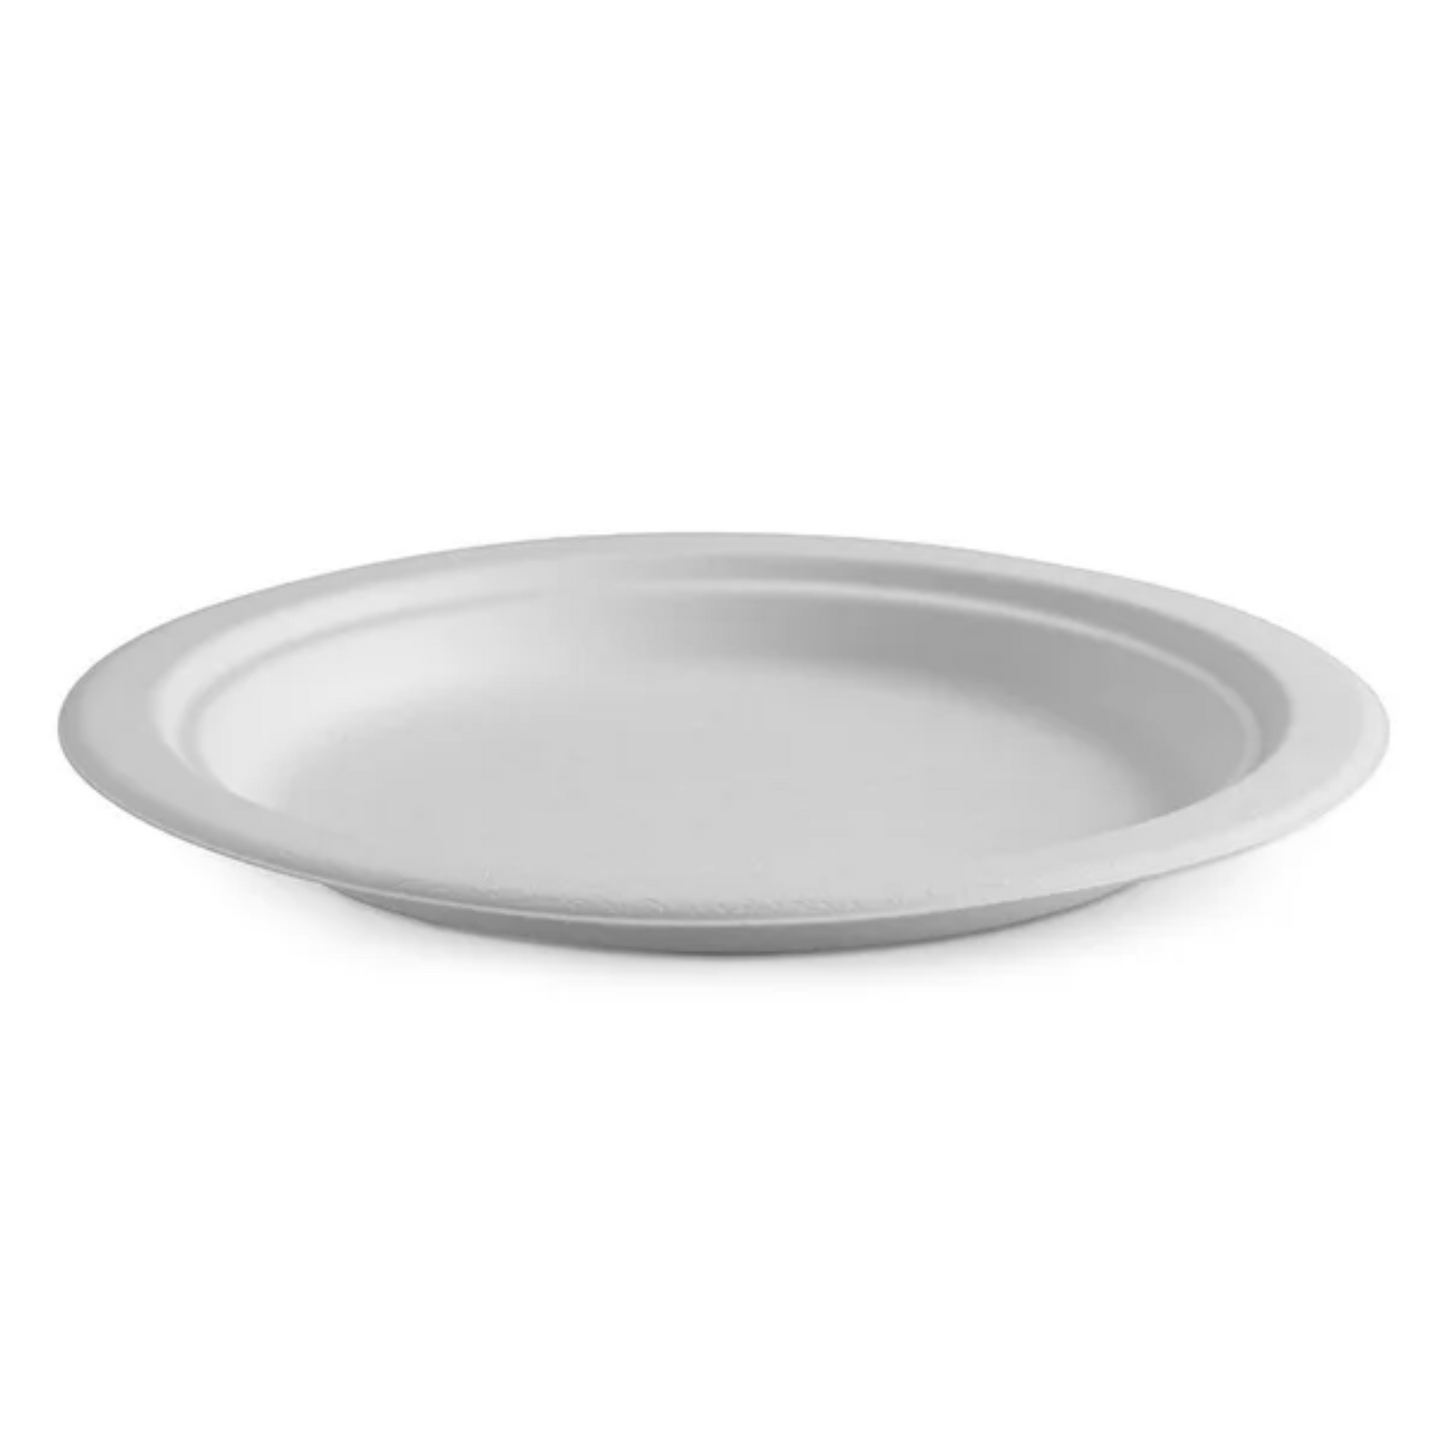 Wholesale Eco-Friendly Disposable Round Plates Full Size (7/9/10 inches)